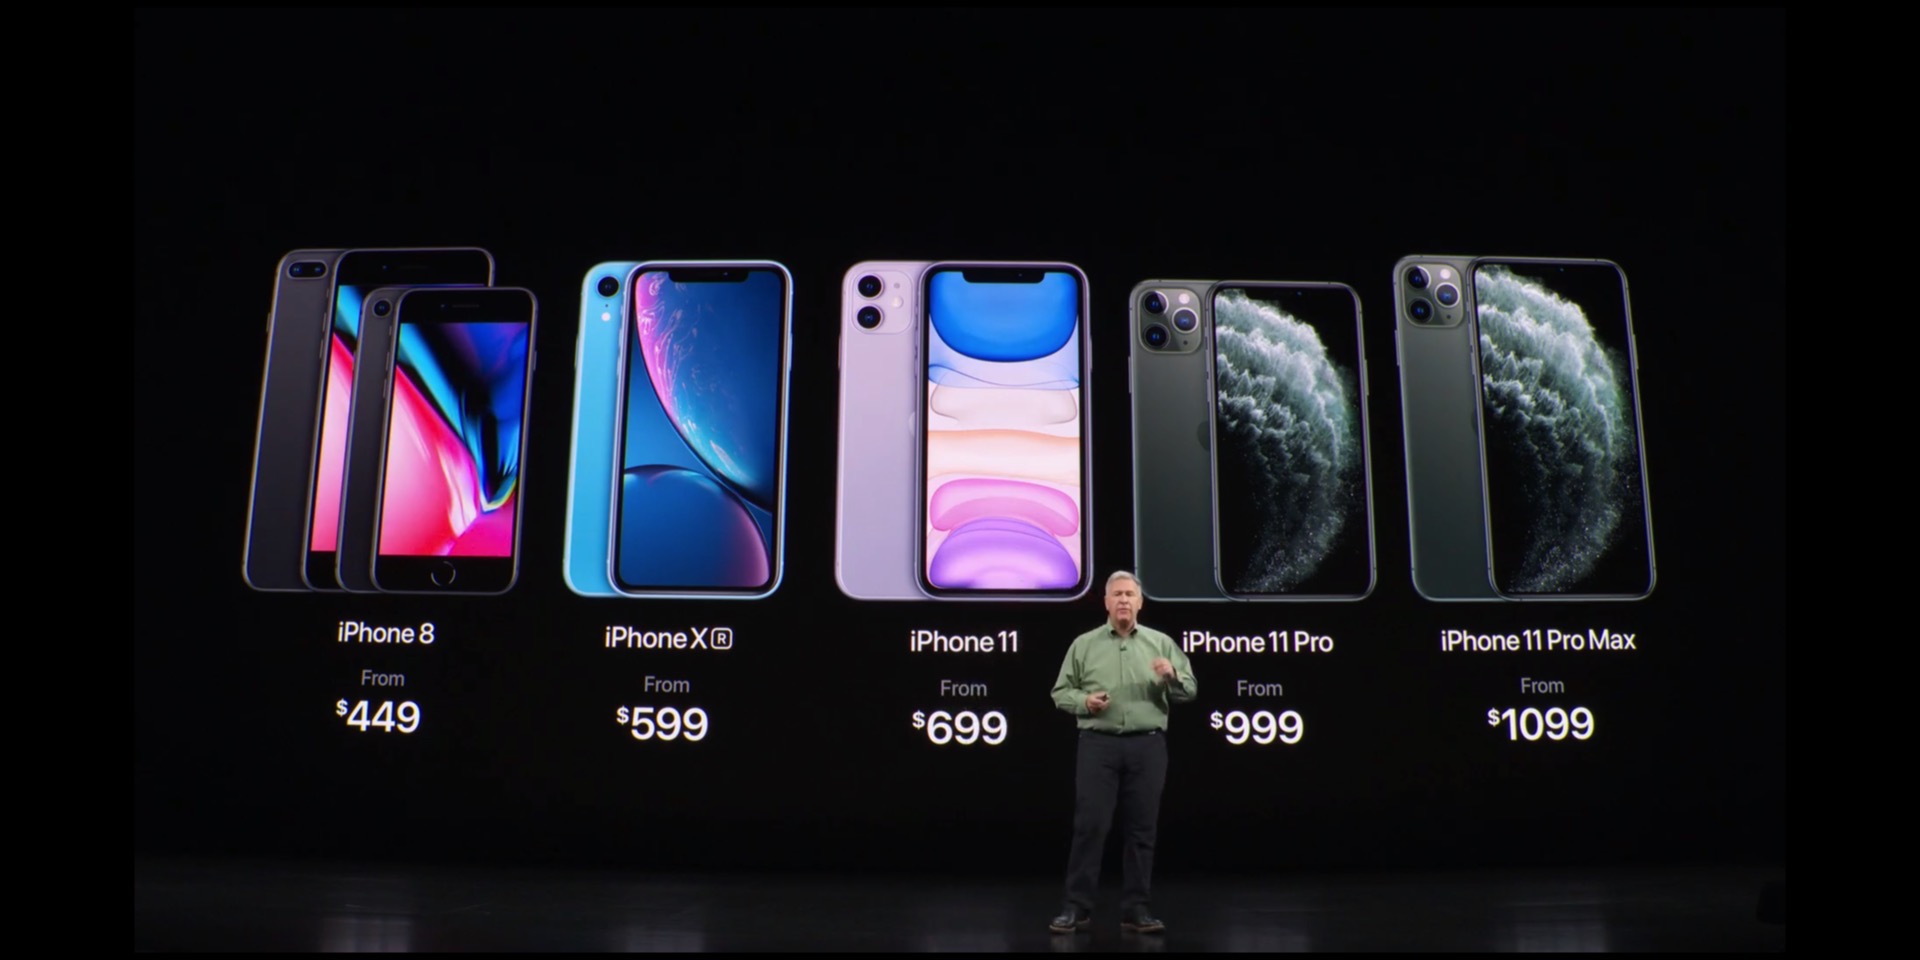 iPhone XR drops to $599, iPhone 8 to $449, following